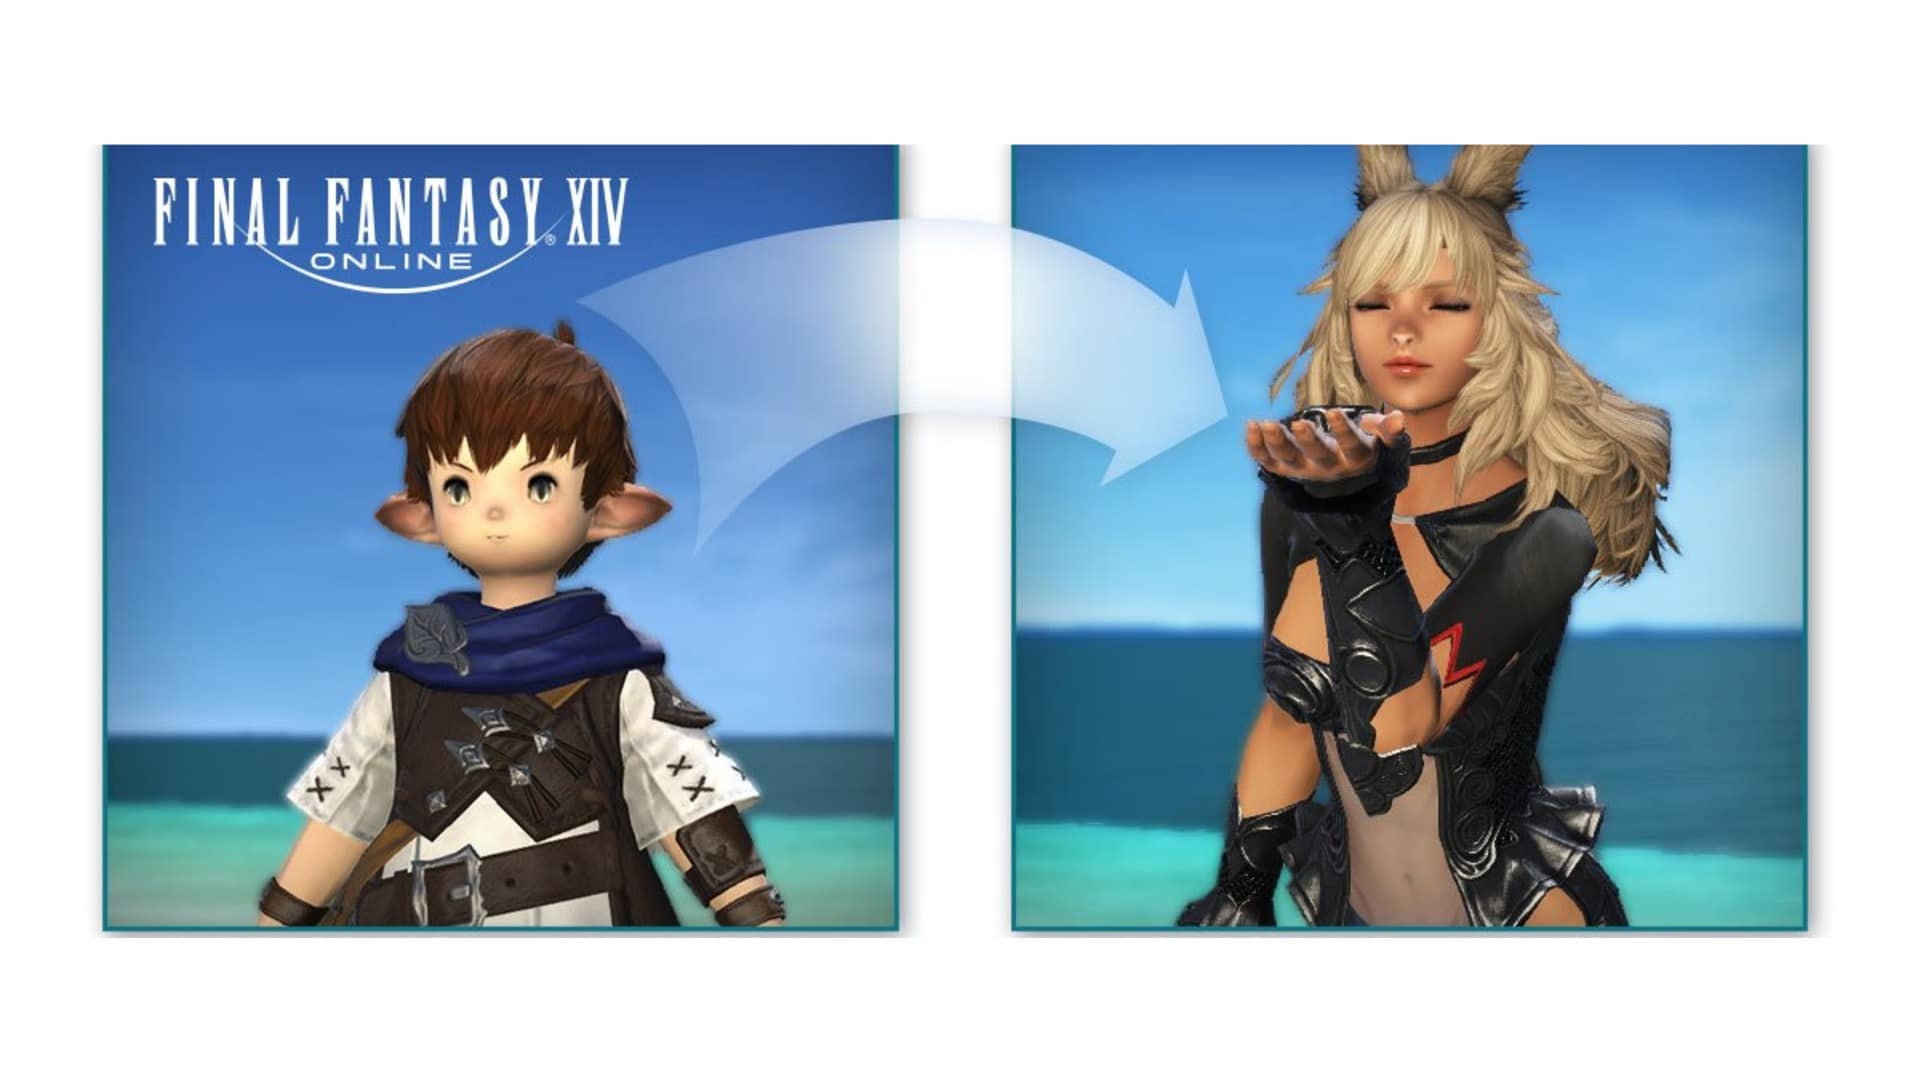 Both Ways Hairstyle  Final Fantasy XIV A Realm Reborn Wiki  FFXIV  FF14  ARR Community Wiki and Guide